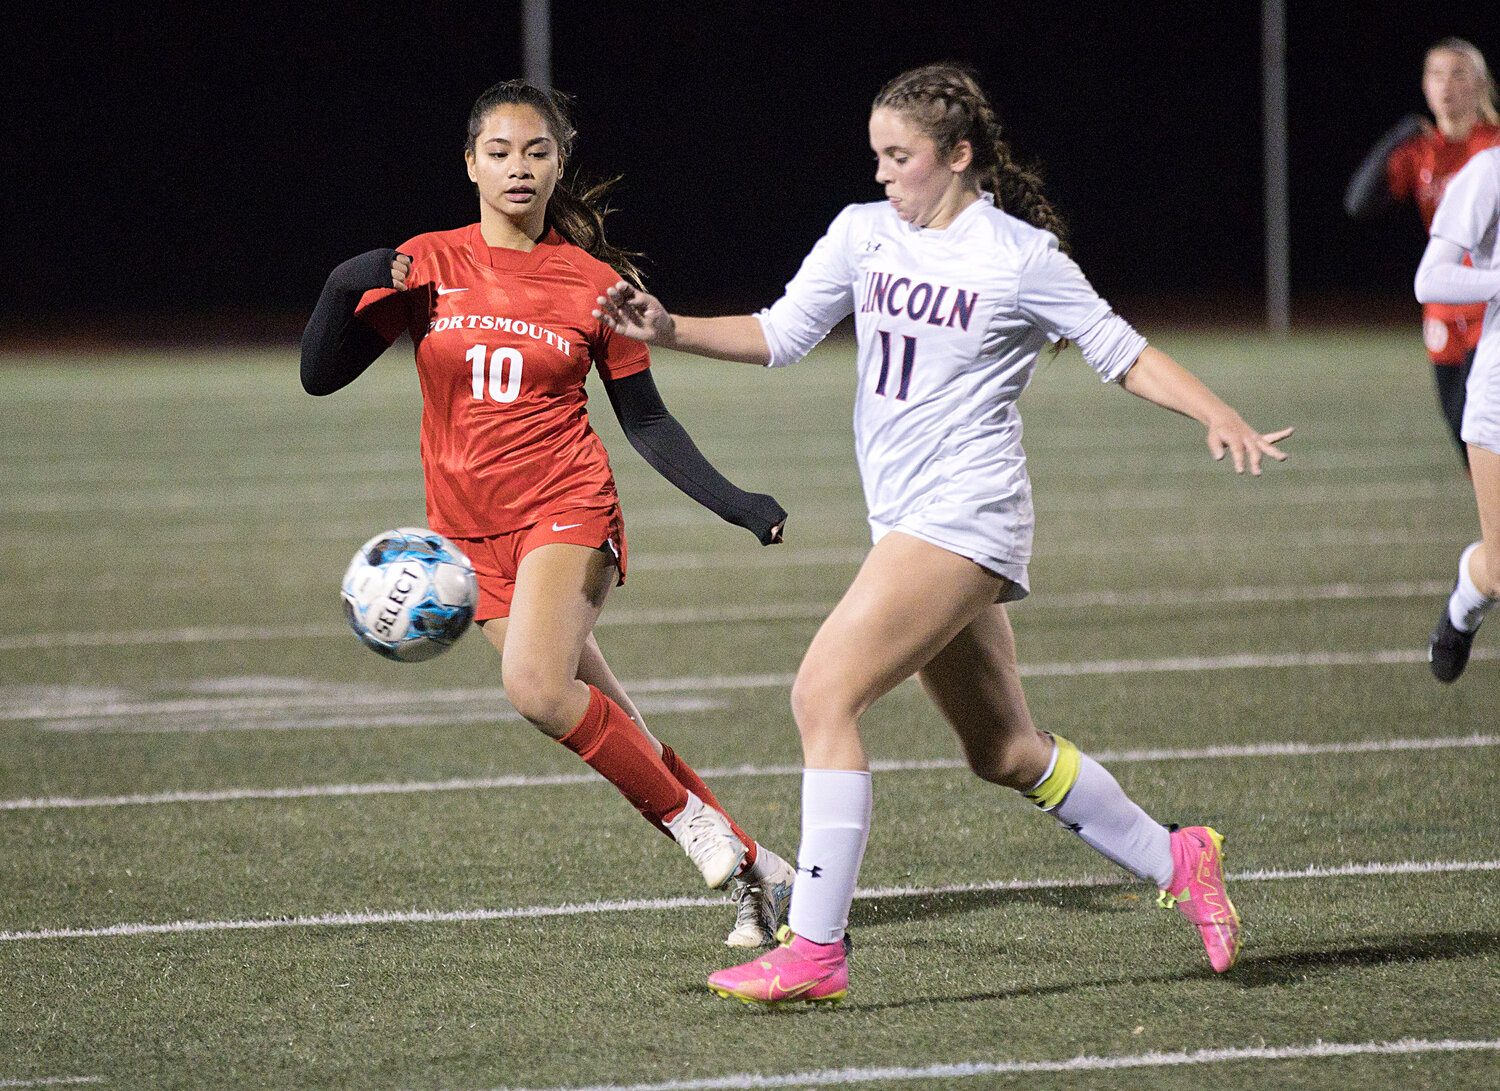 Kylie Delemos prevents a Lincoln opponent from turning toward the goal.